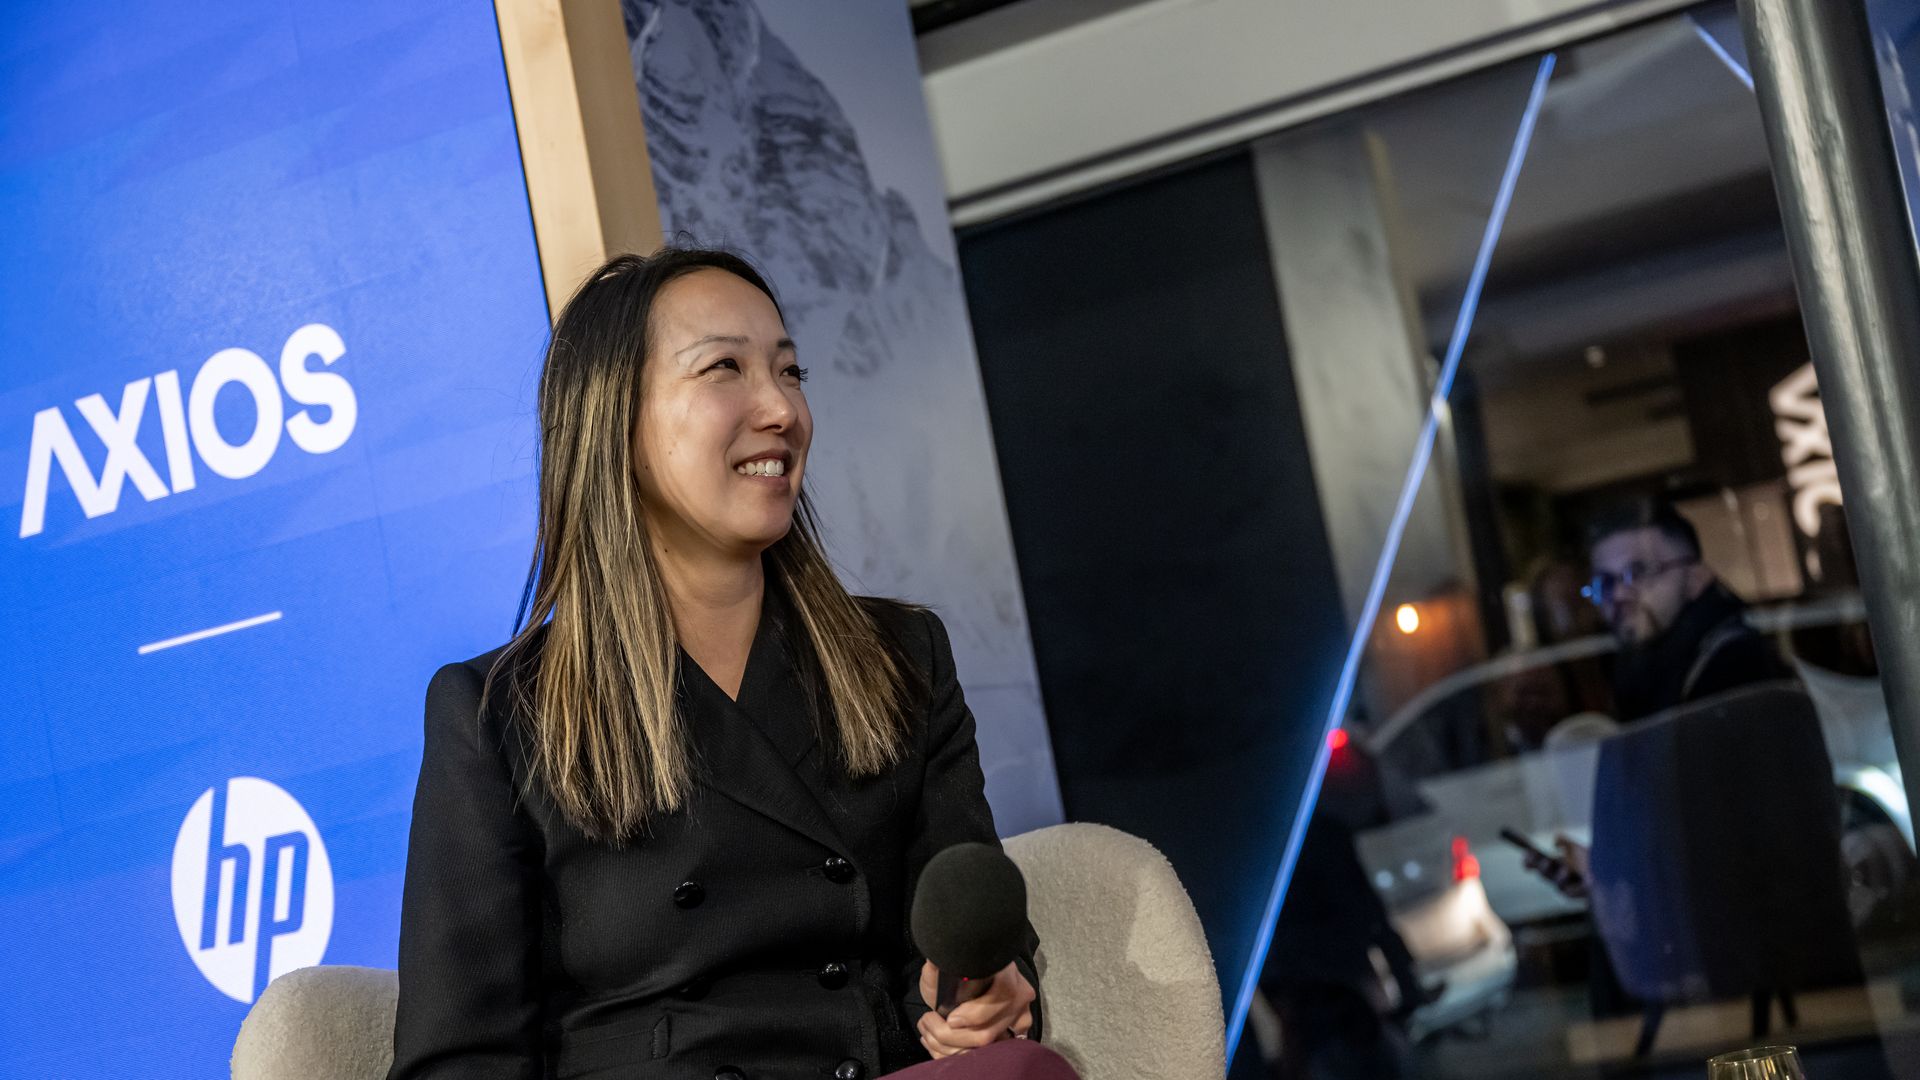 Salesforce’s Clara Shih sitting and smiling on the Axios stage. 